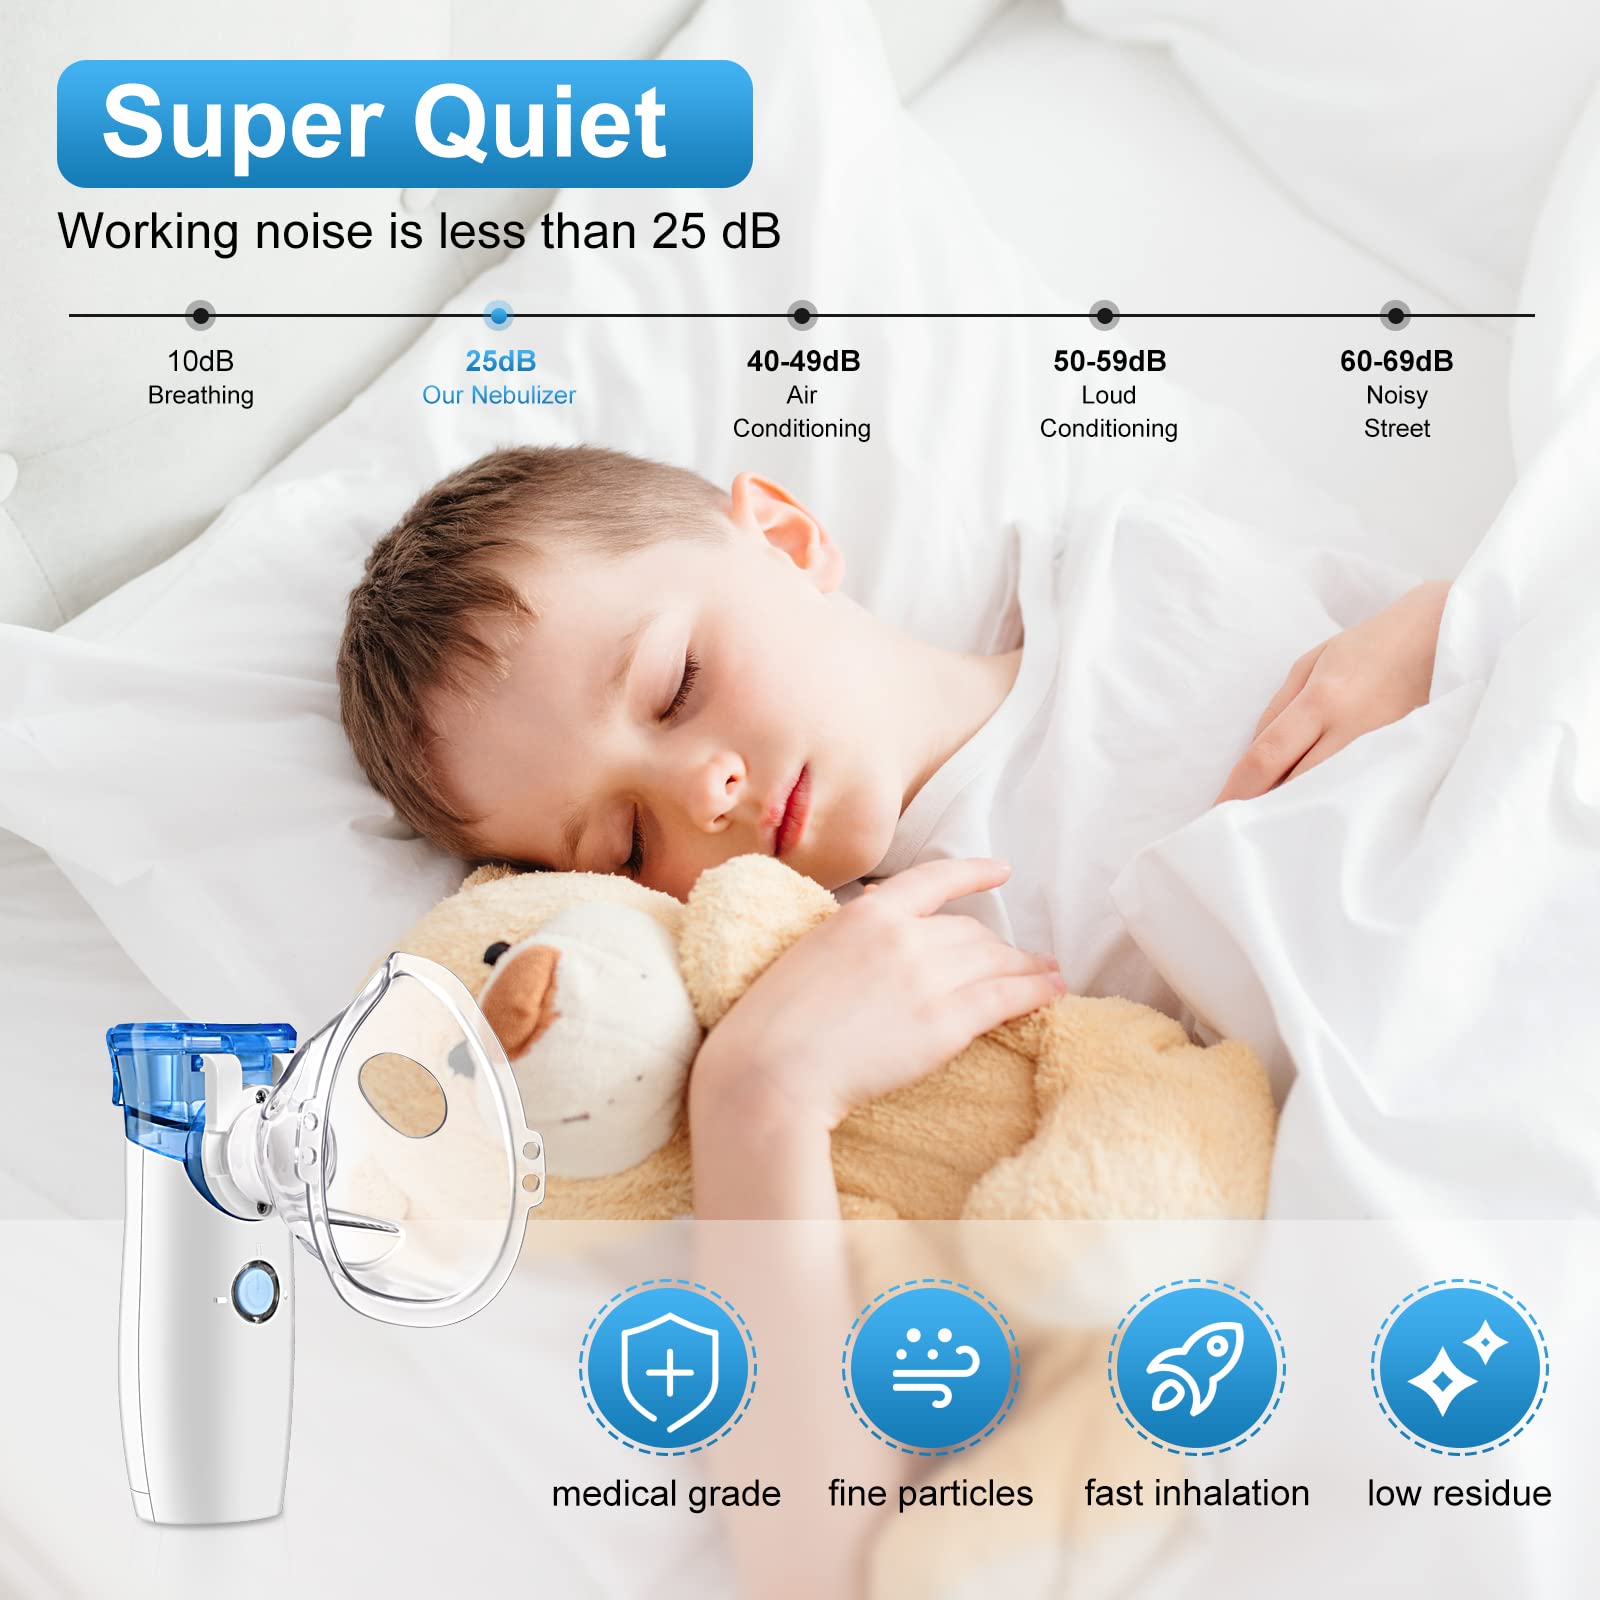 Portable Nebulizer Machine - Handheld Nebulizer Personal Inhalers for Breathing Problems for Travel,Home Daily Use